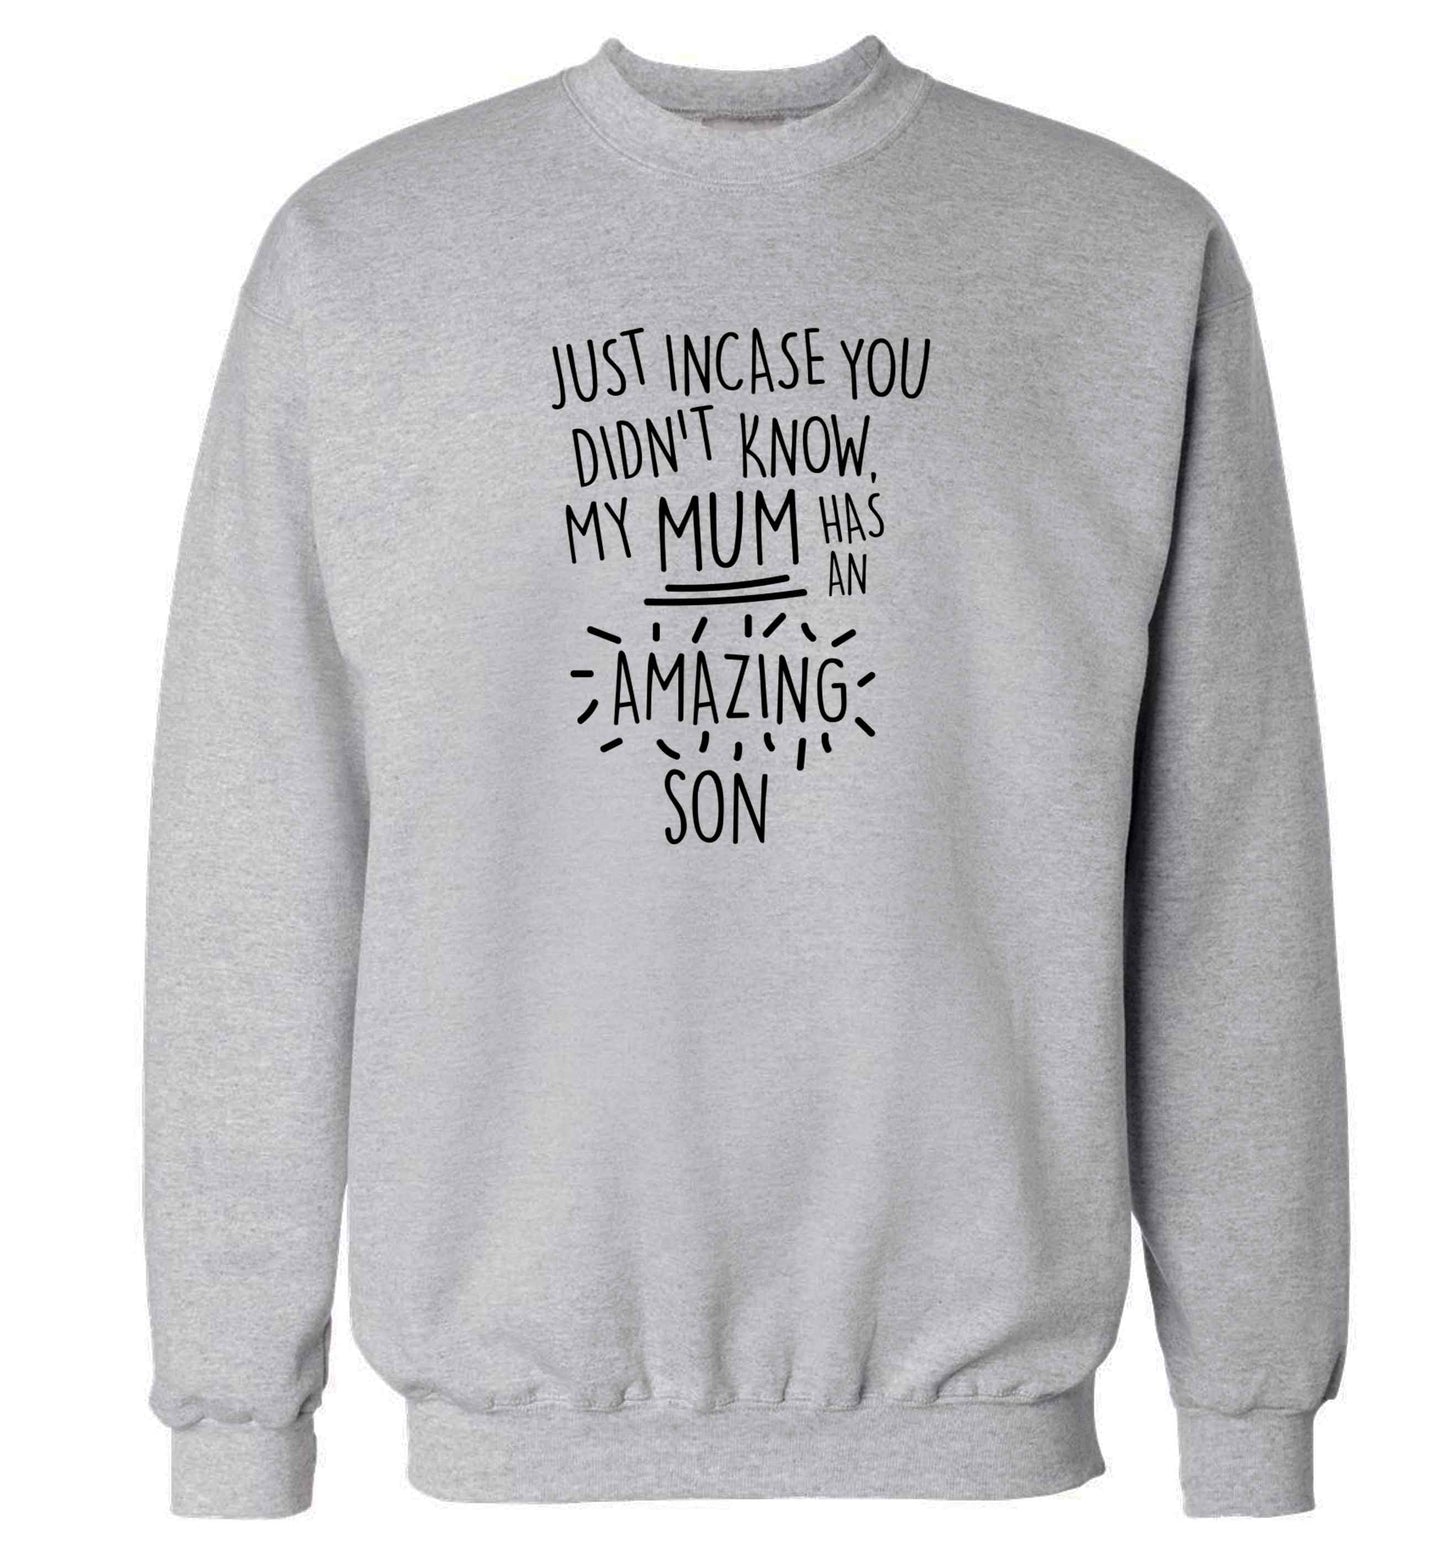 Just incase you didn't know my mum has an amazing son adult's unisex grey sweater 2XL